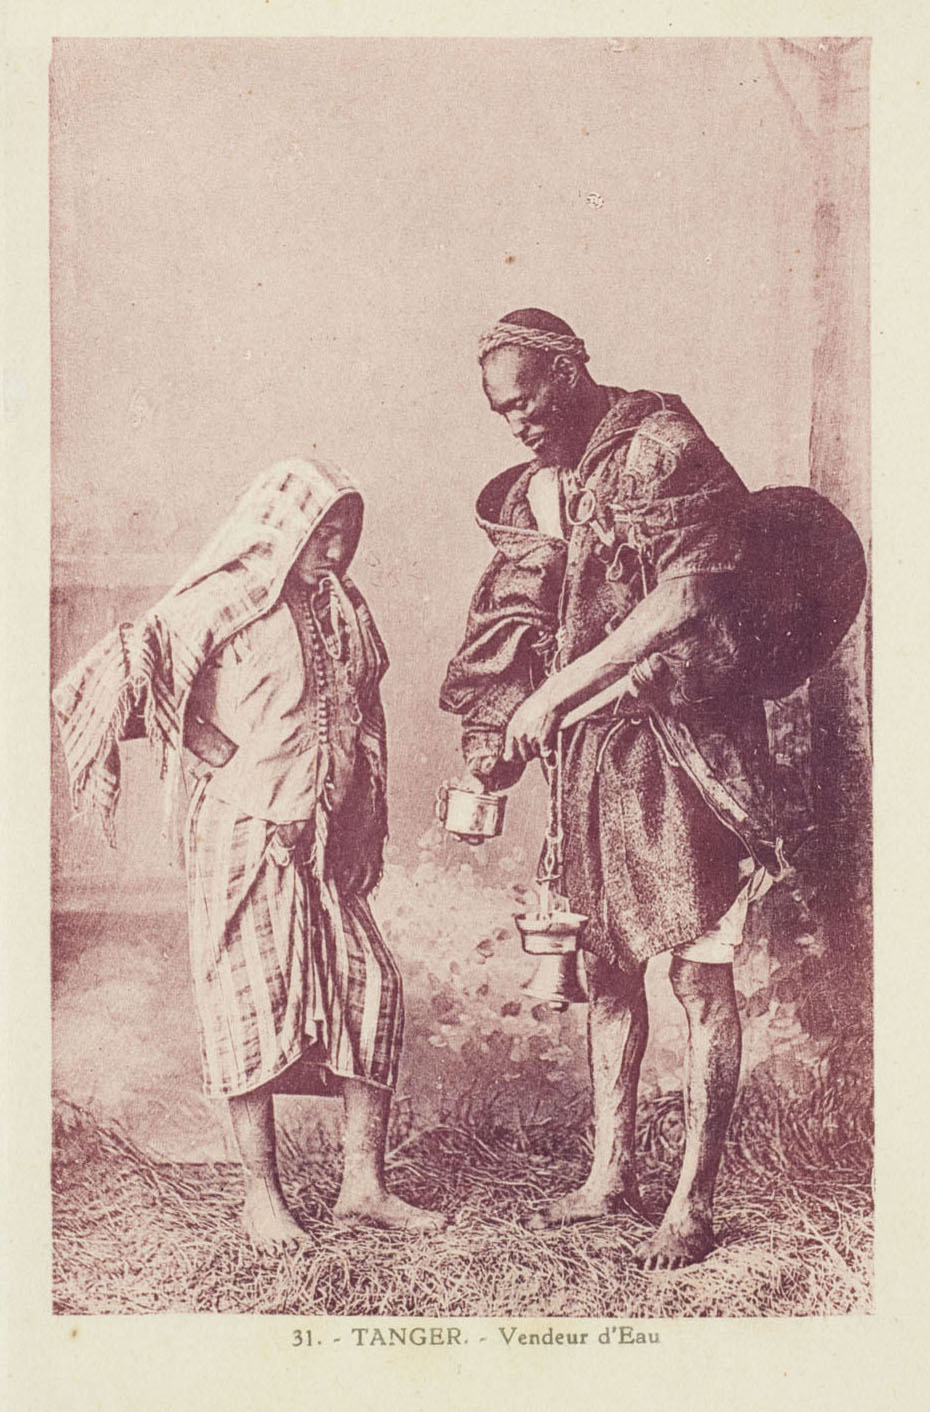 Portrait of a water seller and woman in traditional clothing